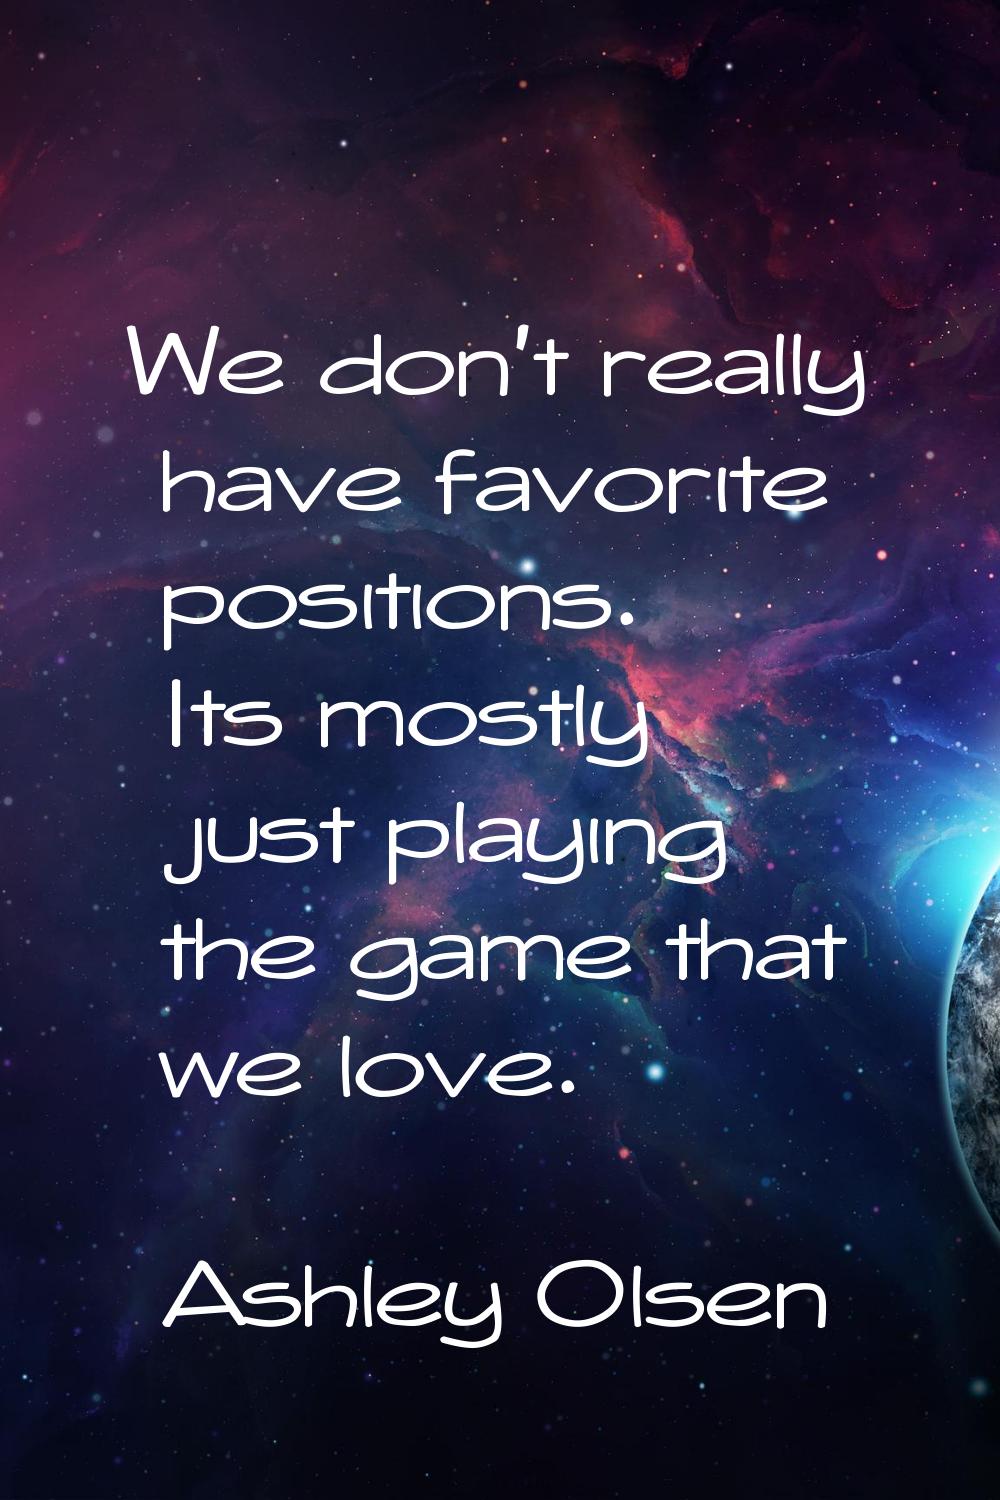 We don't really have favorite positions. Its mostly just playing the game that we love.